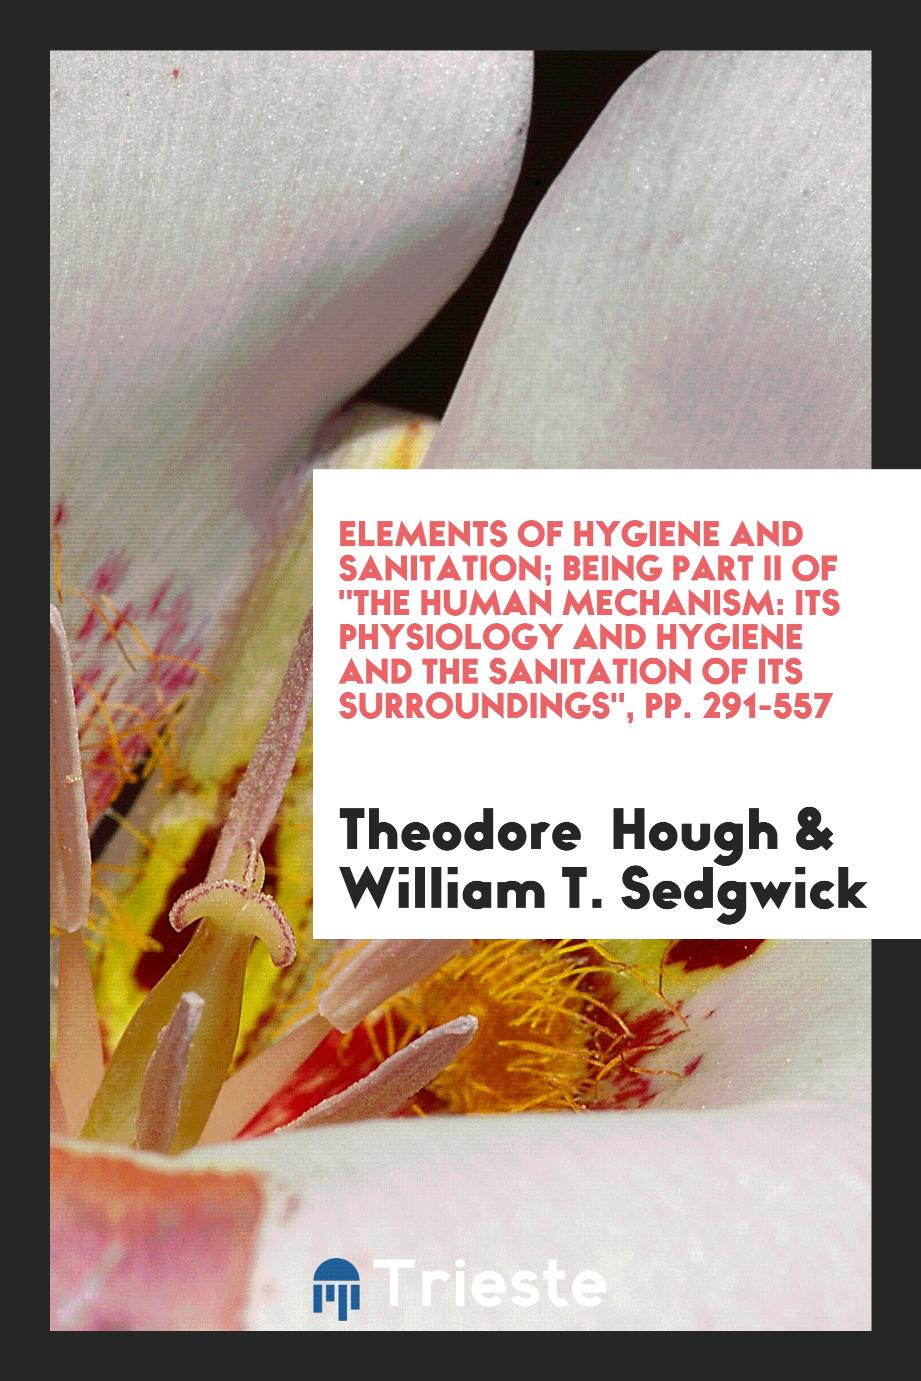 Elements of Hygiene and Sanitation; Being Part II Of "The Human Mechanism: Its Physiology and Hygiene and the Sanitation of Its Surroundings", pp. 291-557